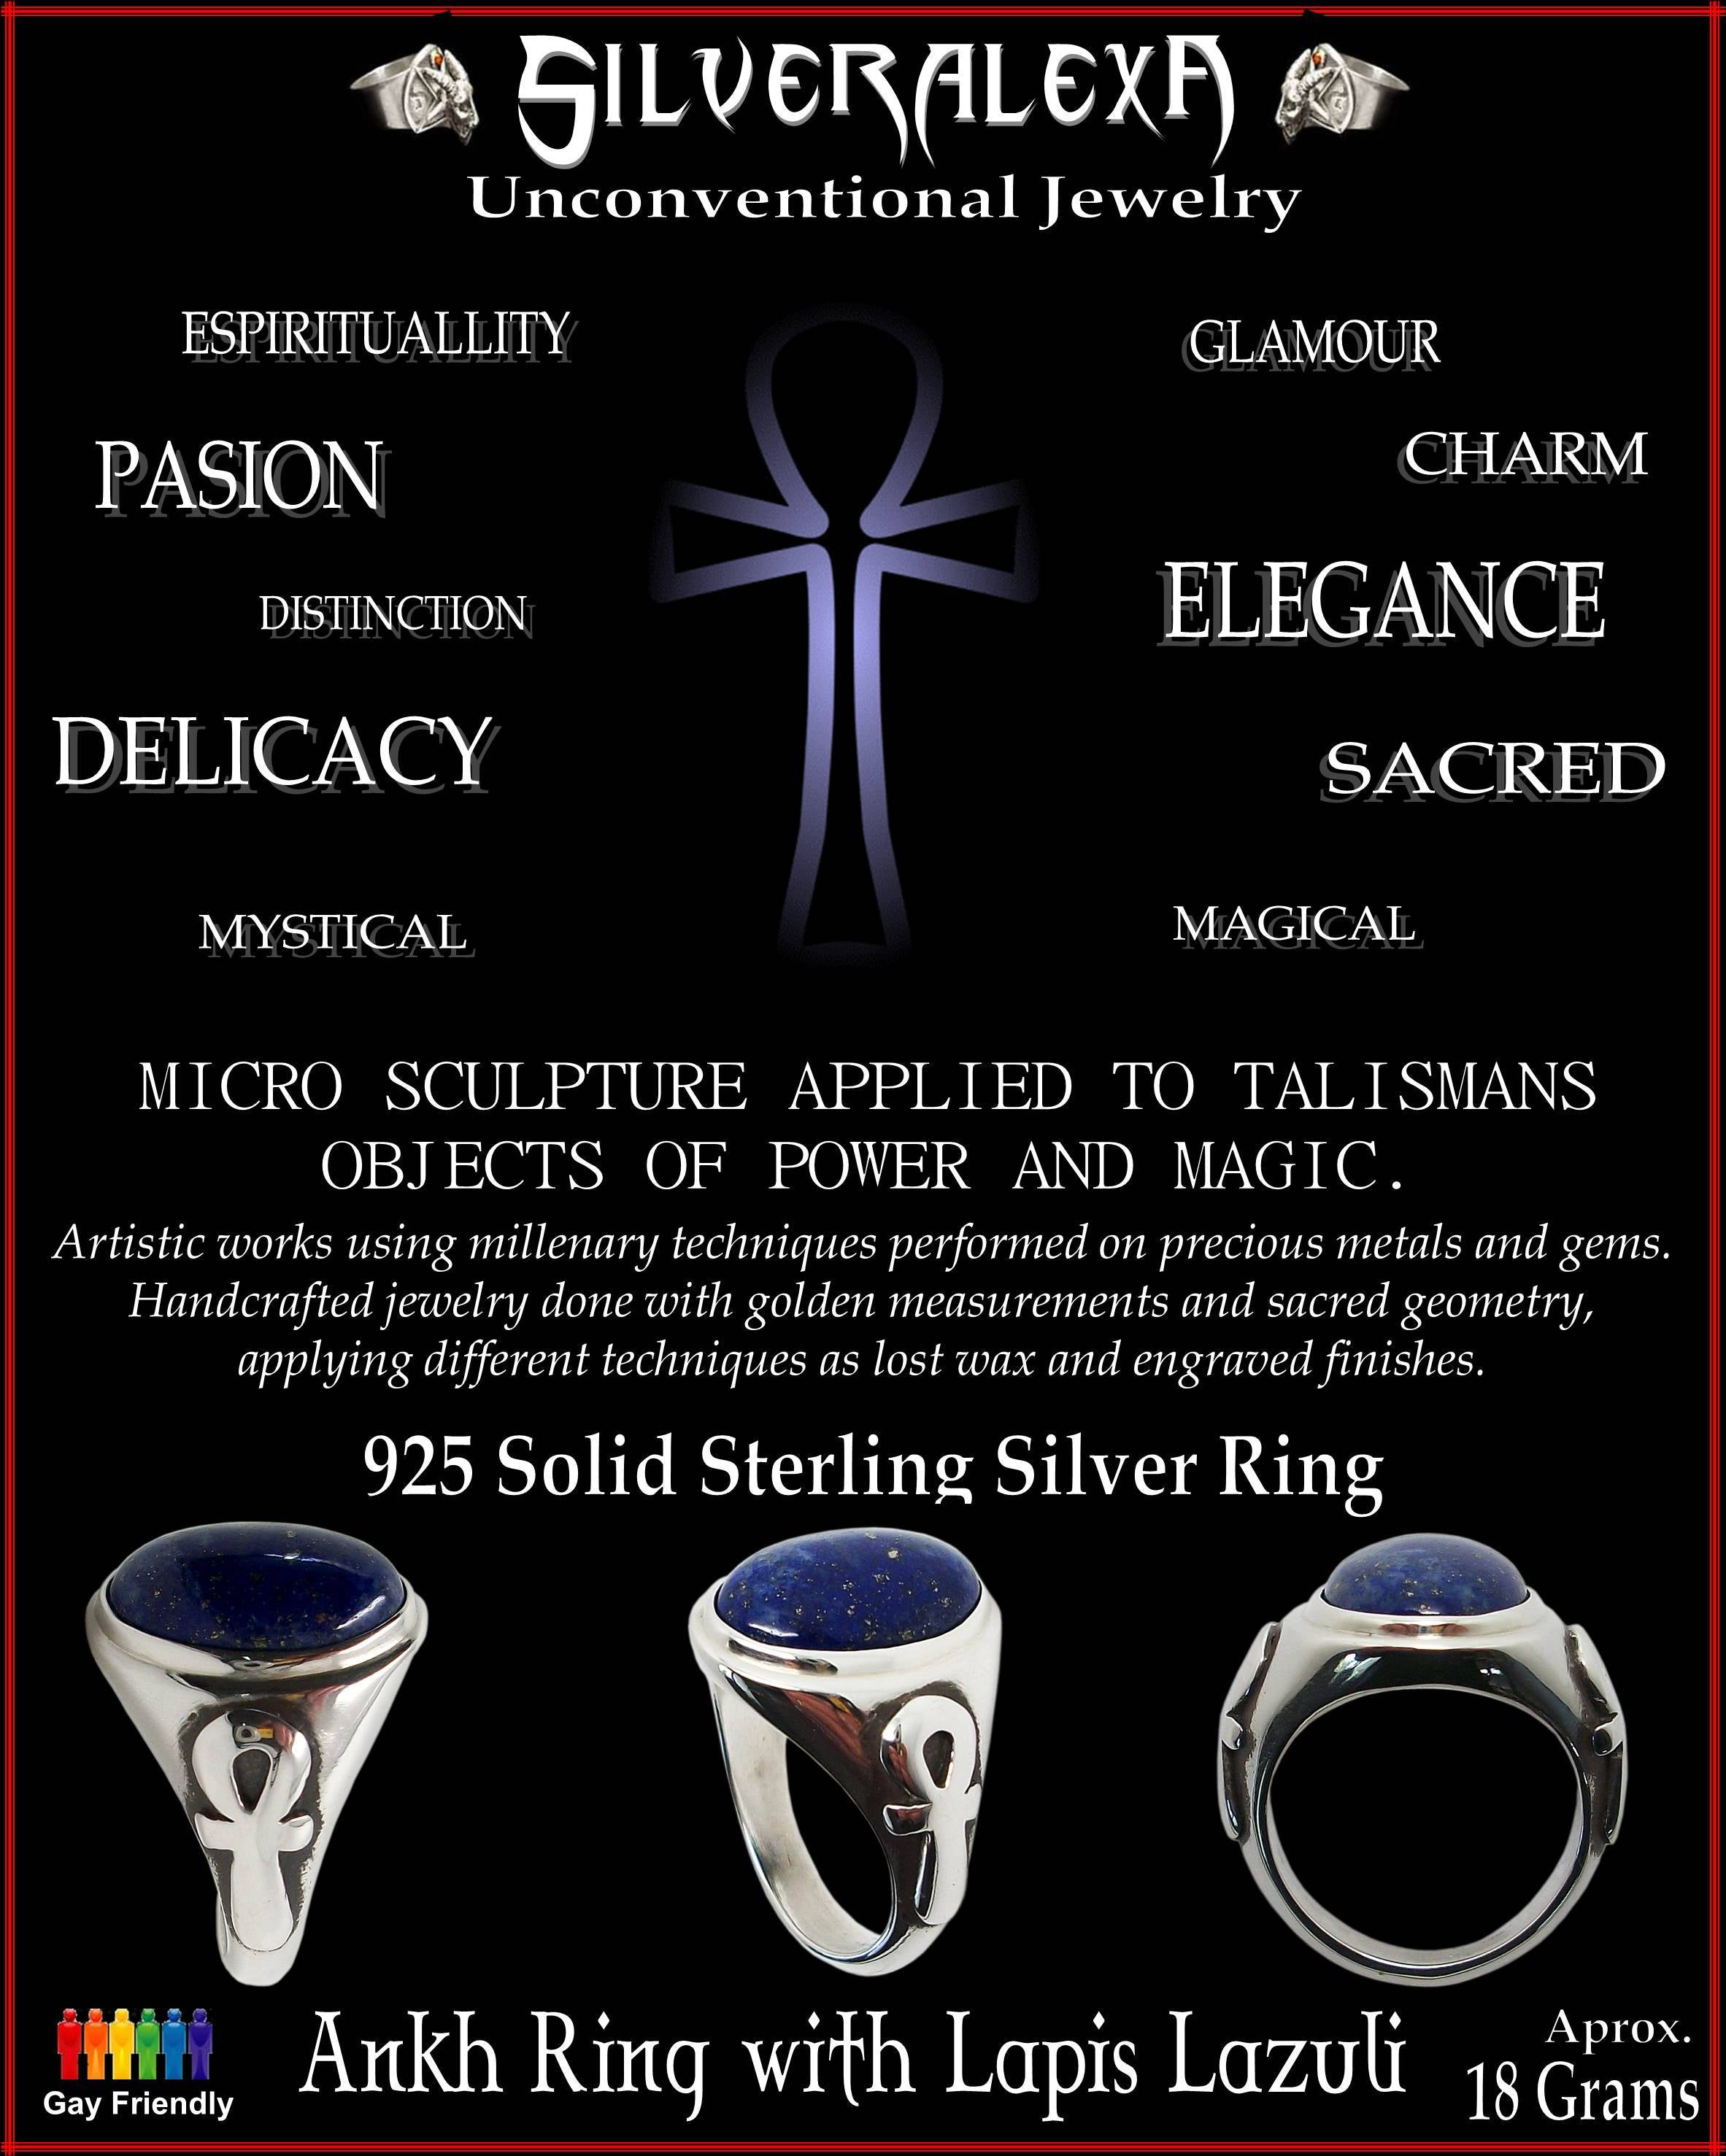 Ankh ring - Sterling Silver Egyptian Ankh Cross Ring with Lapis Lazuli - powerful fertility charm